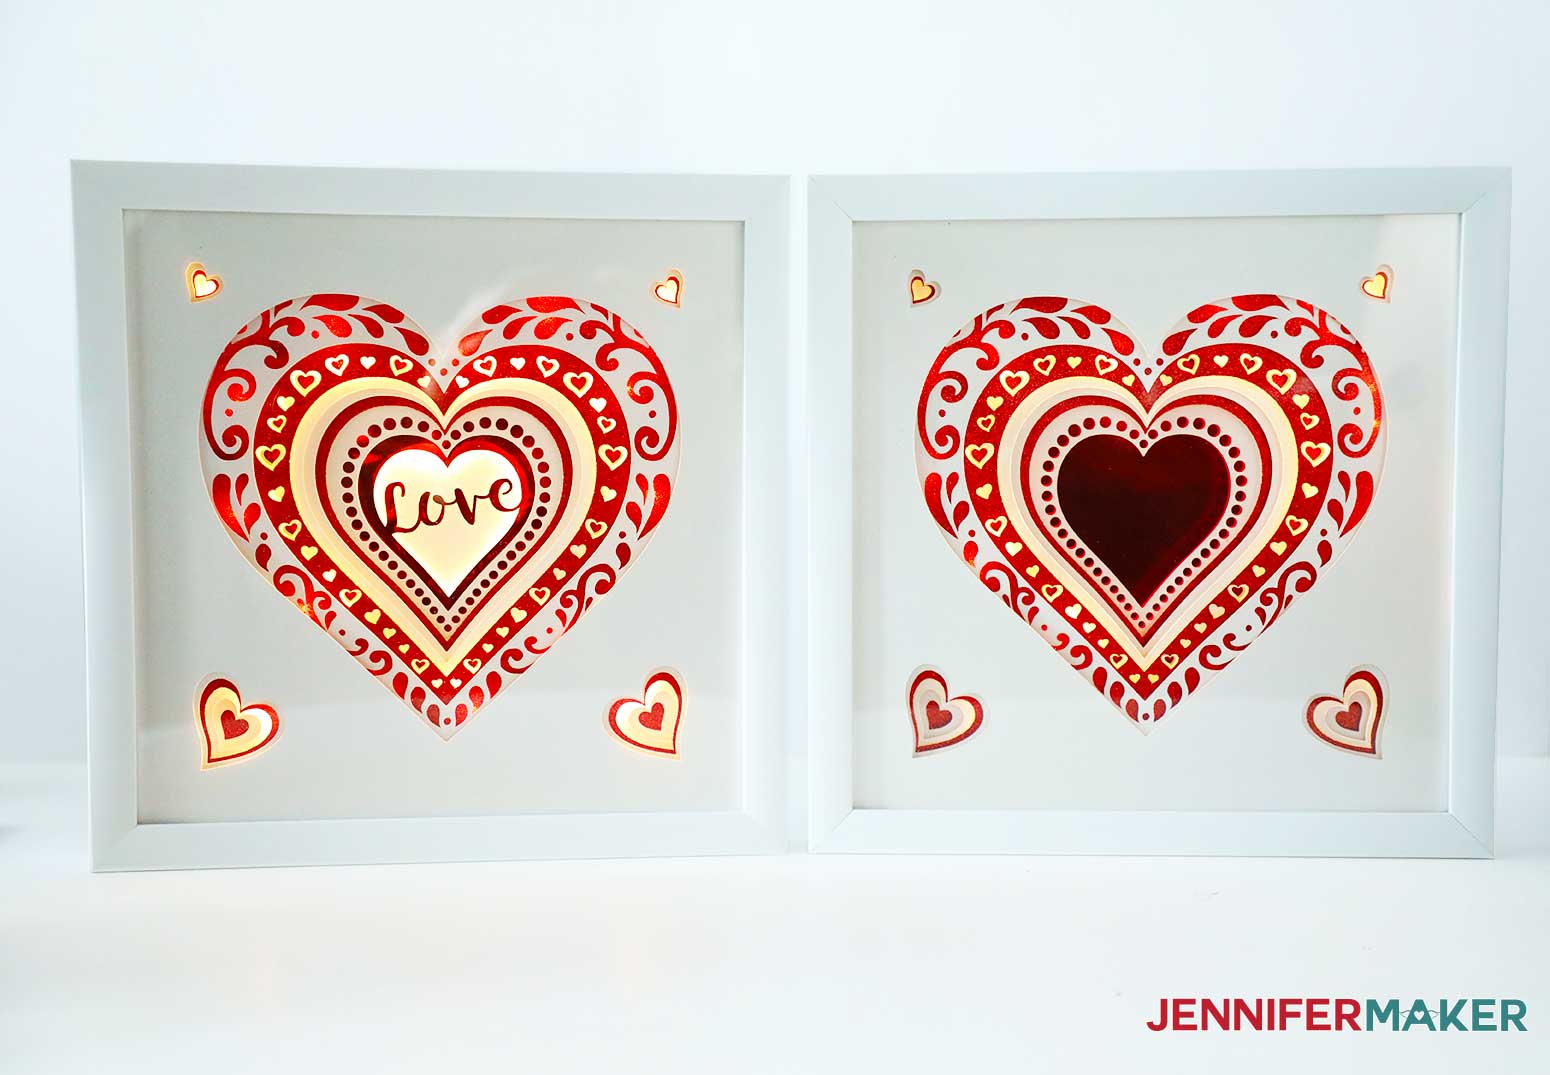 Heart layered frames with lights